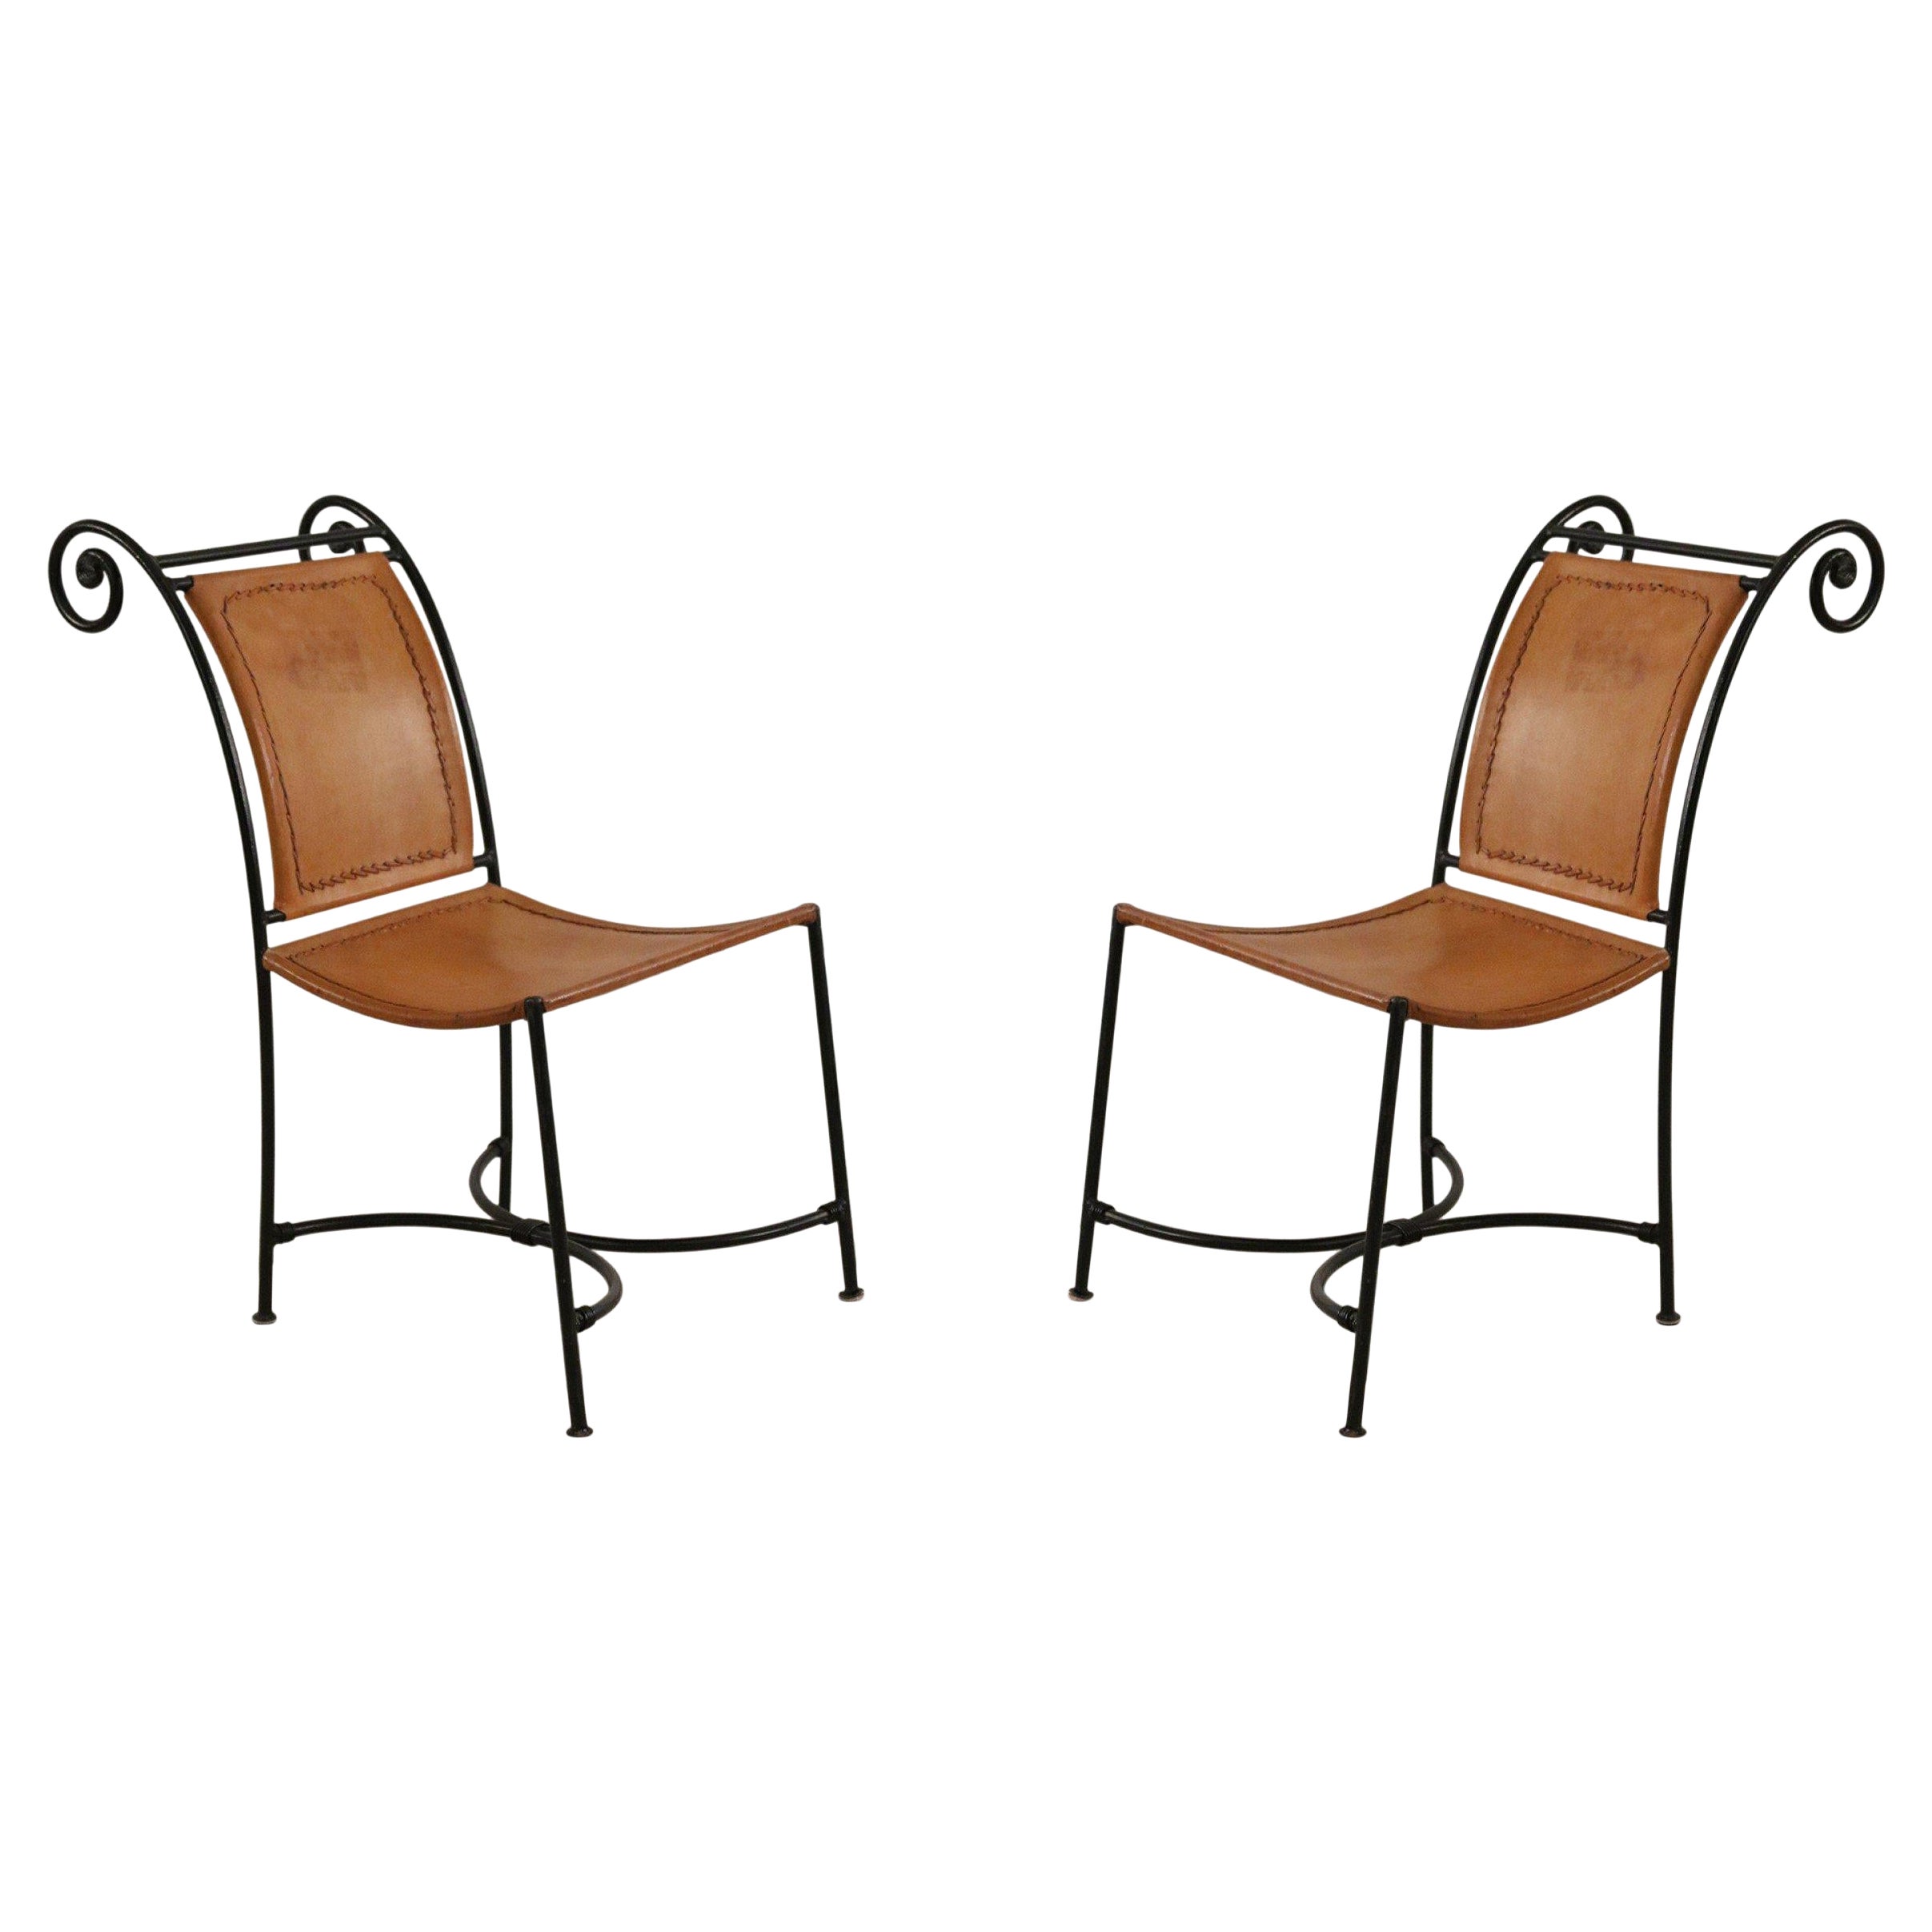 Pair of Mid-Century Wrought Iron and Leather Side Chairs